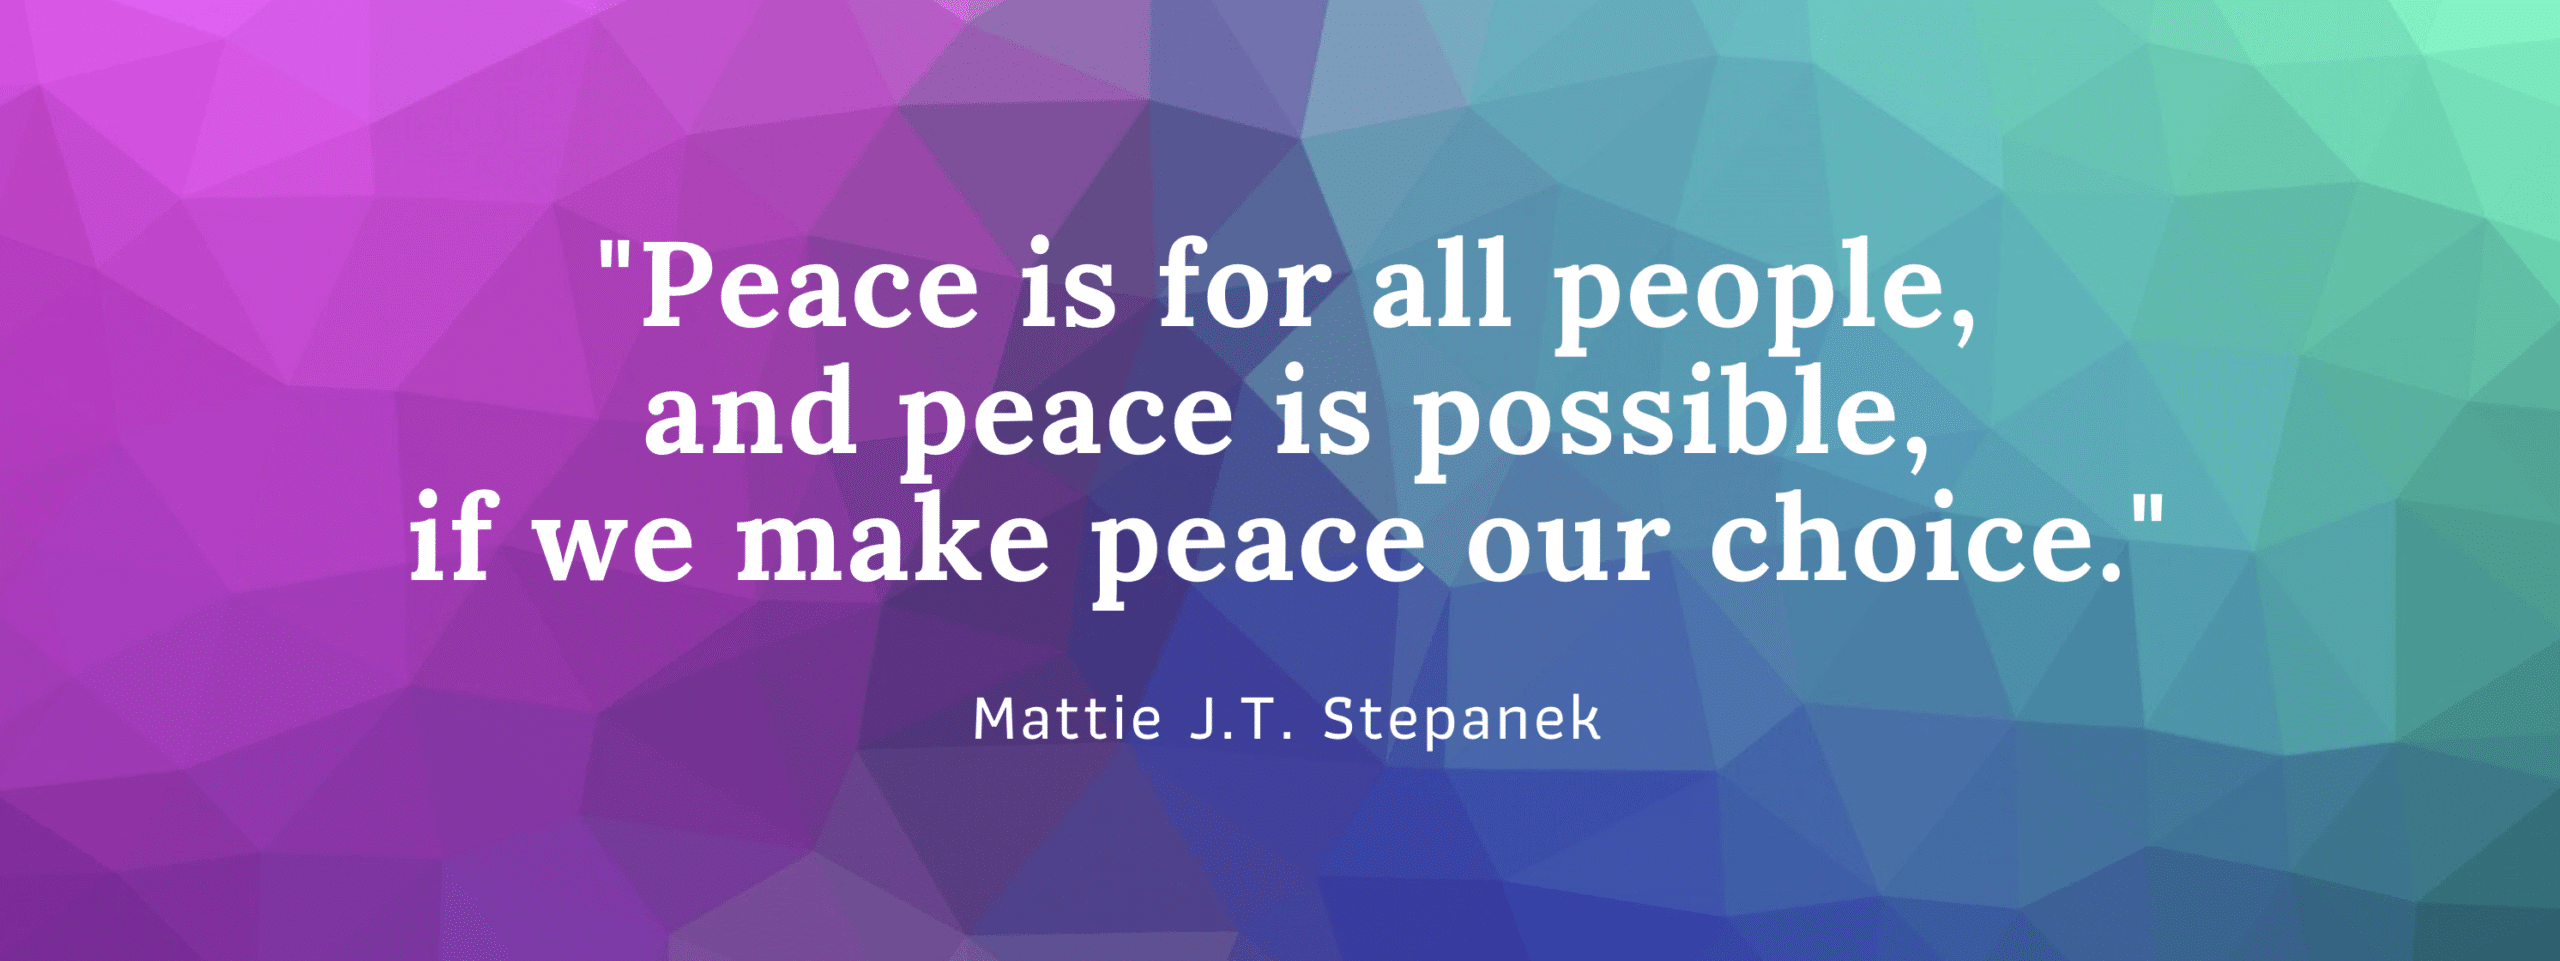 Peace is for all people Mattie quote